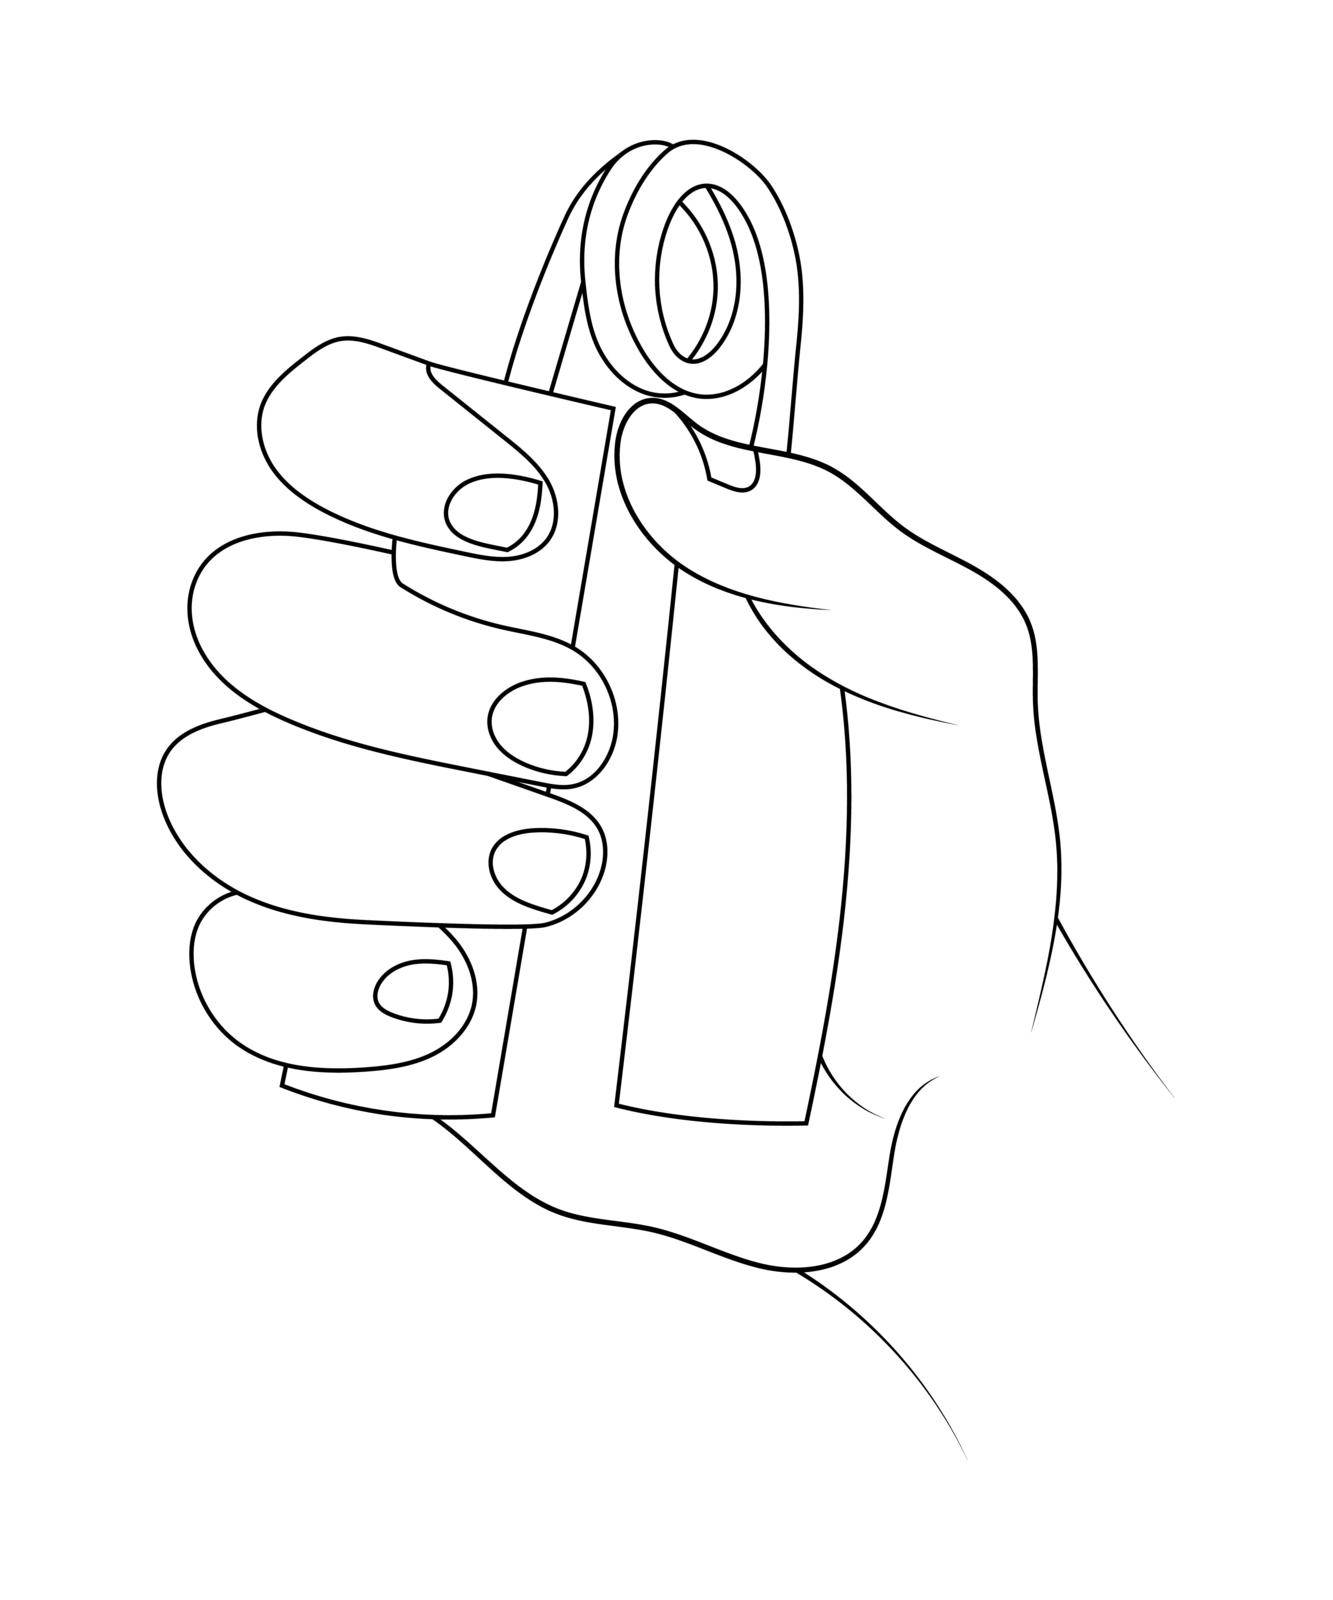 Hand grip arm muscle trainer sketch illustration.